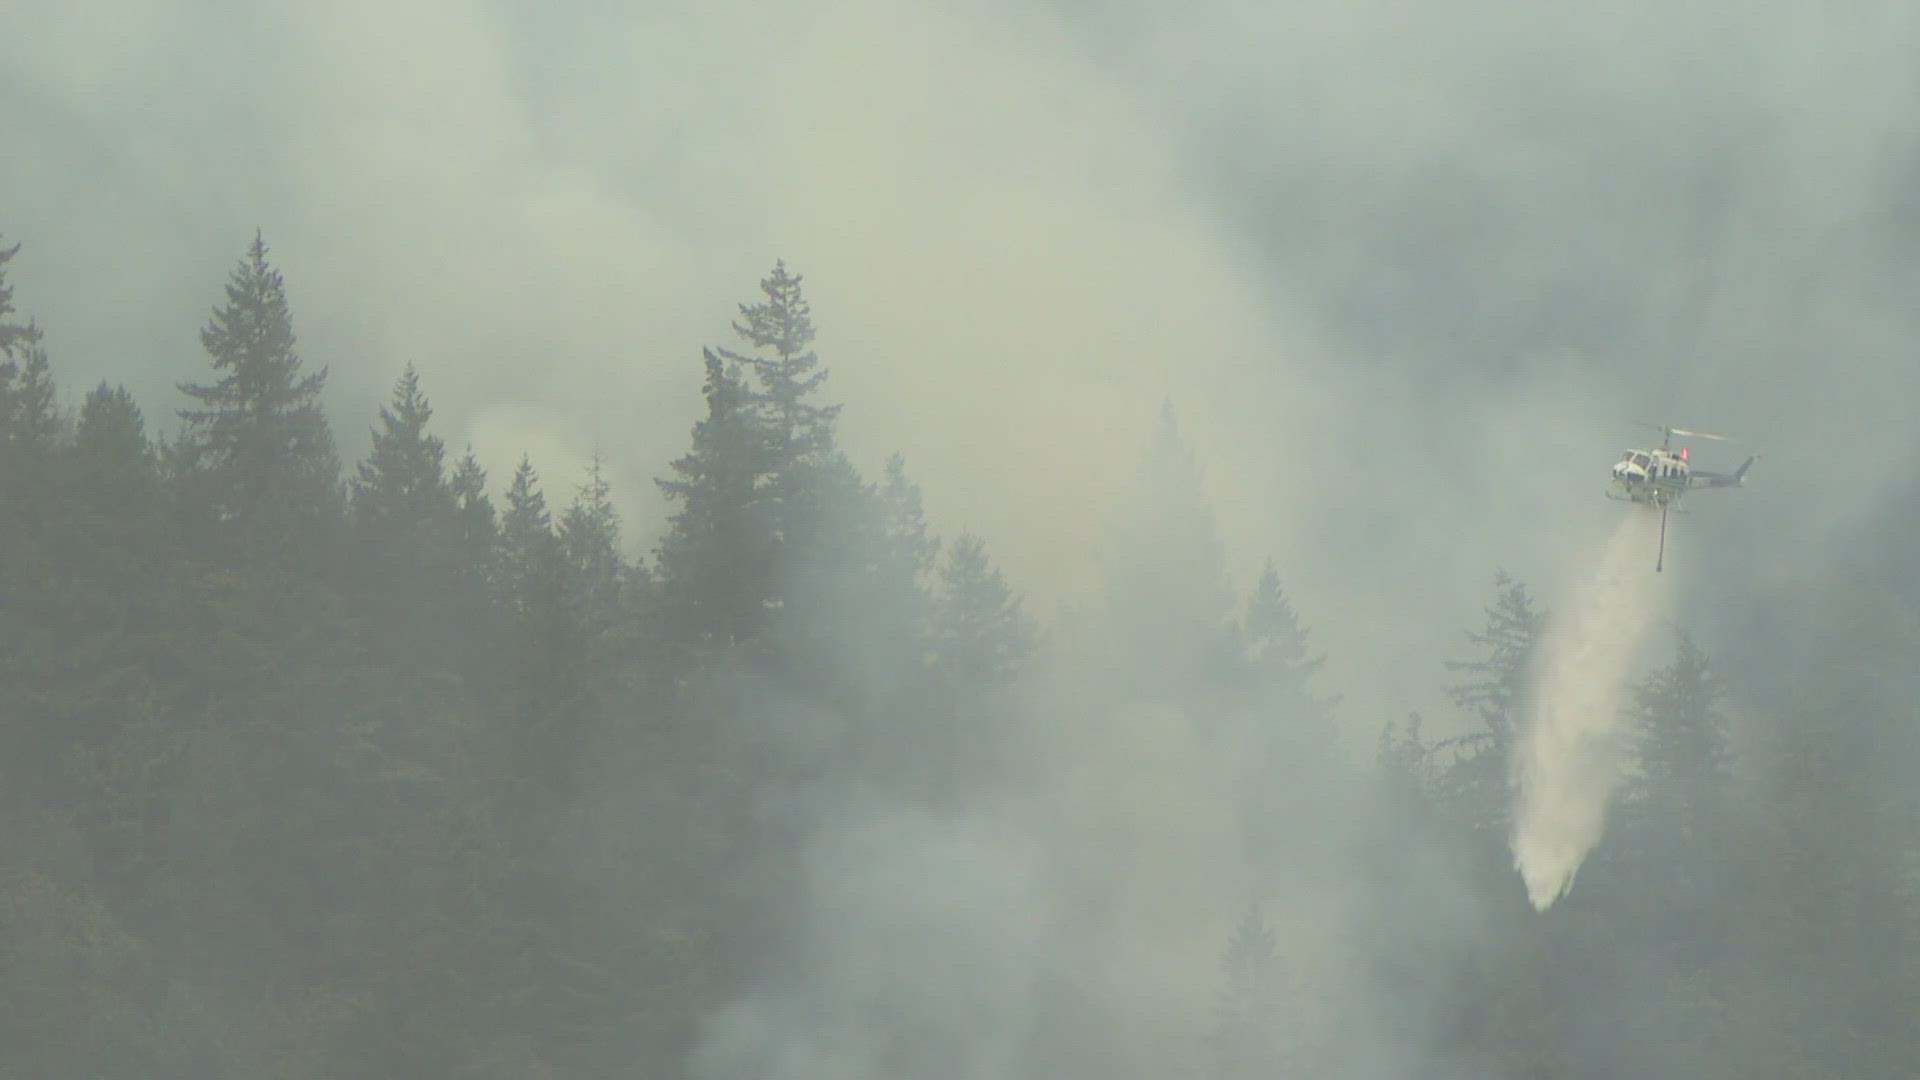 It comes after dozens of lightning-caused fires last week. Fire officials say while rain may help in some cases, fire season is still in full swing.